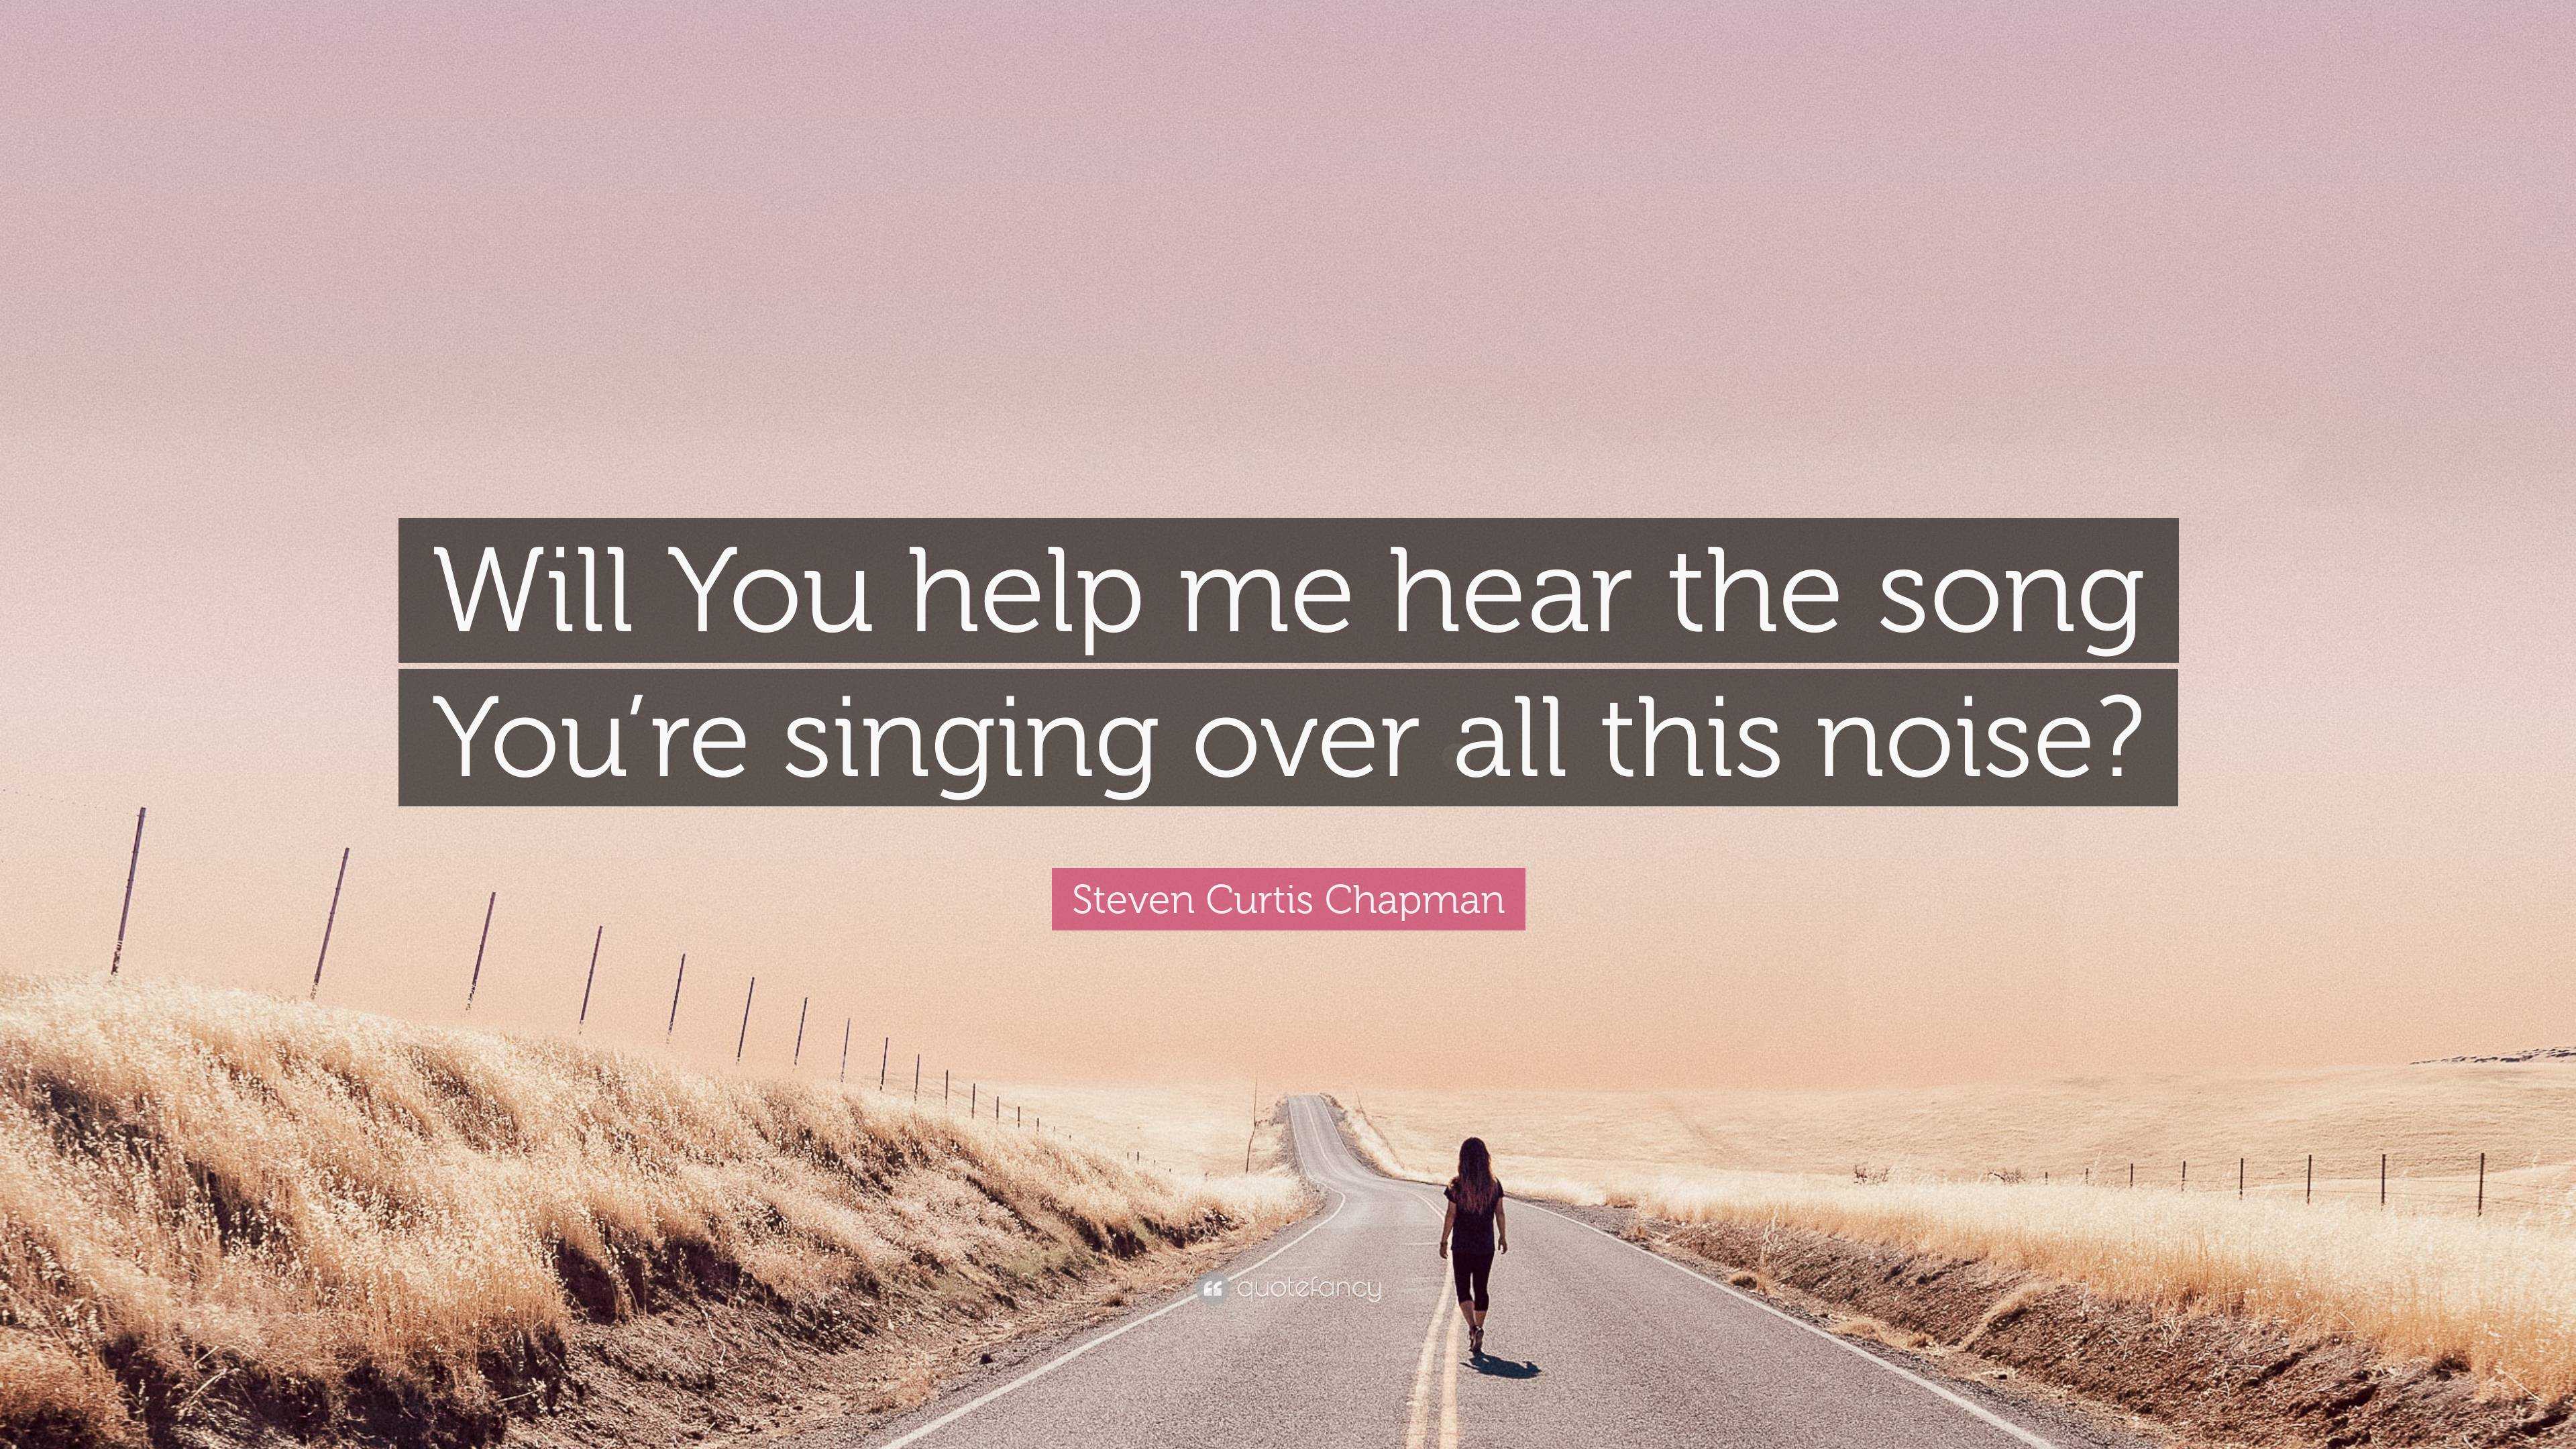 Steven Curtis Chapman Quote Will You Help Me Hear The Song Youre Singing Over All This Noise